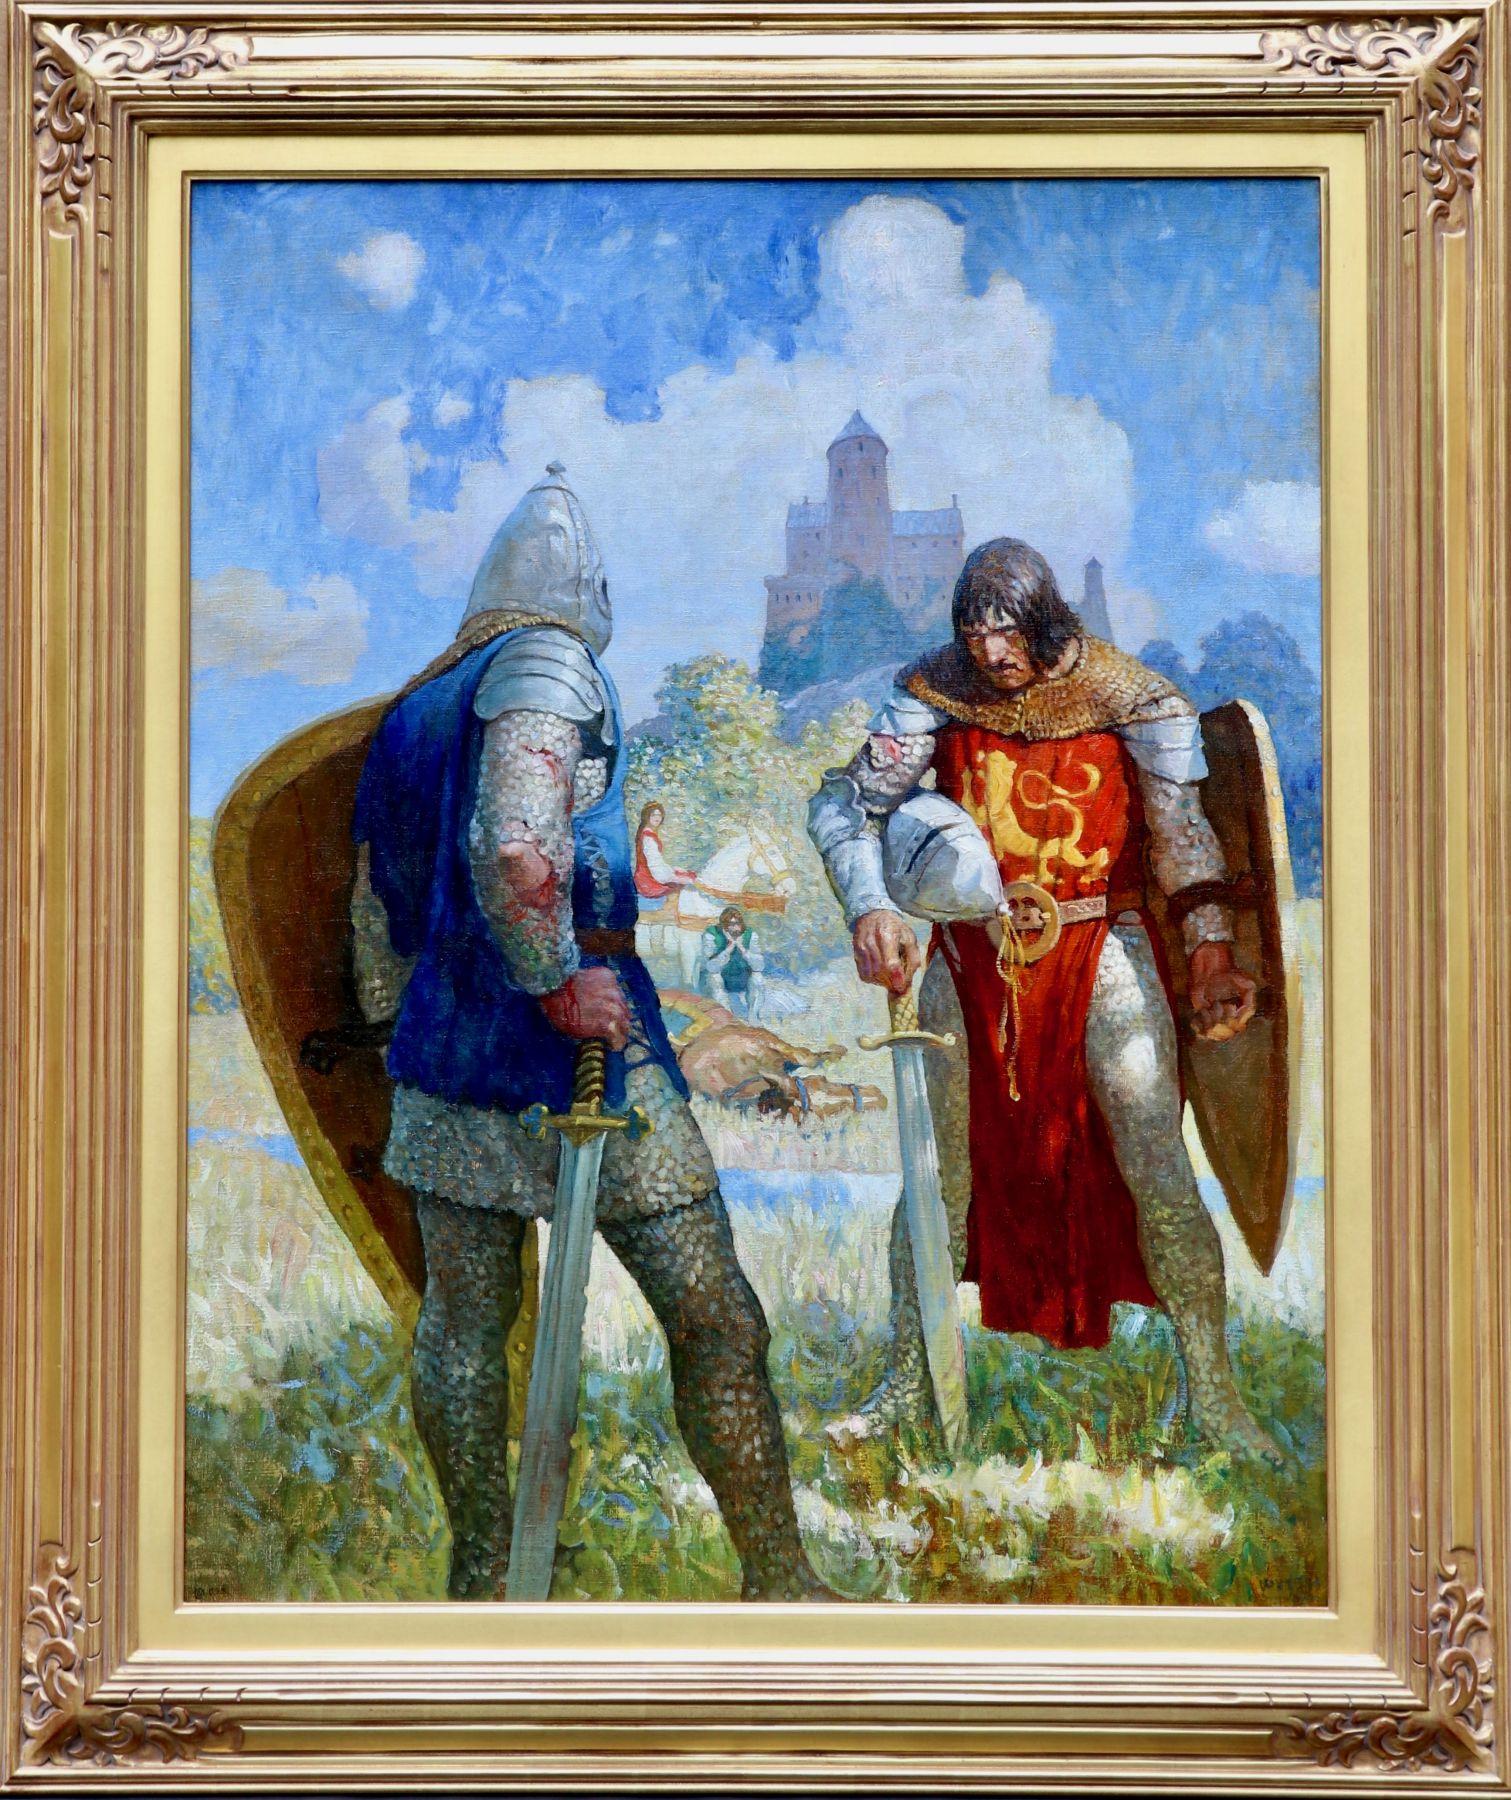 The Boy's King Arthur - Painting by Newell Convers Wyeth